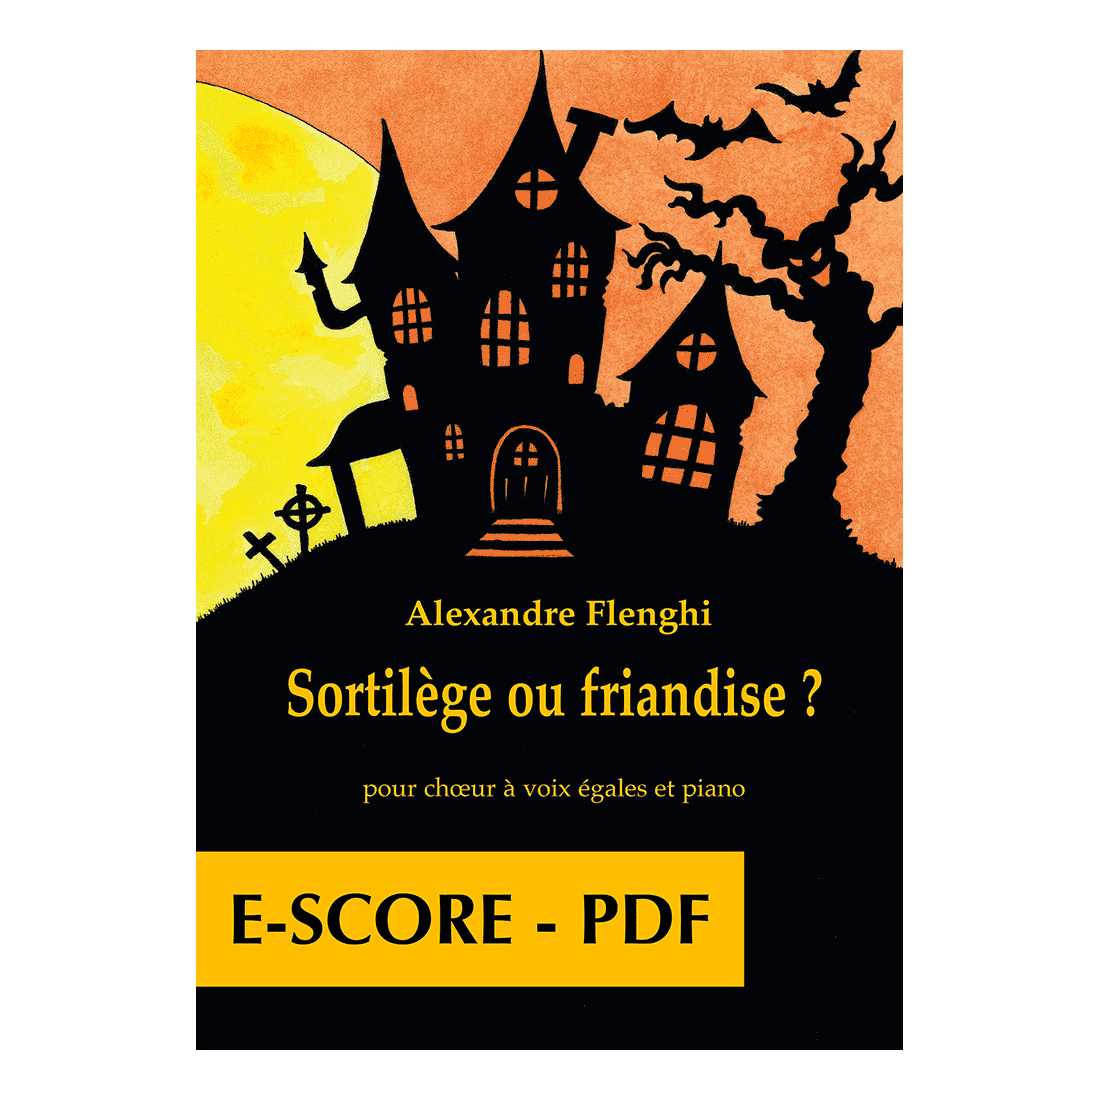 Sortilège ou friandise ? for choir of equal voices and piano - E-score PDF